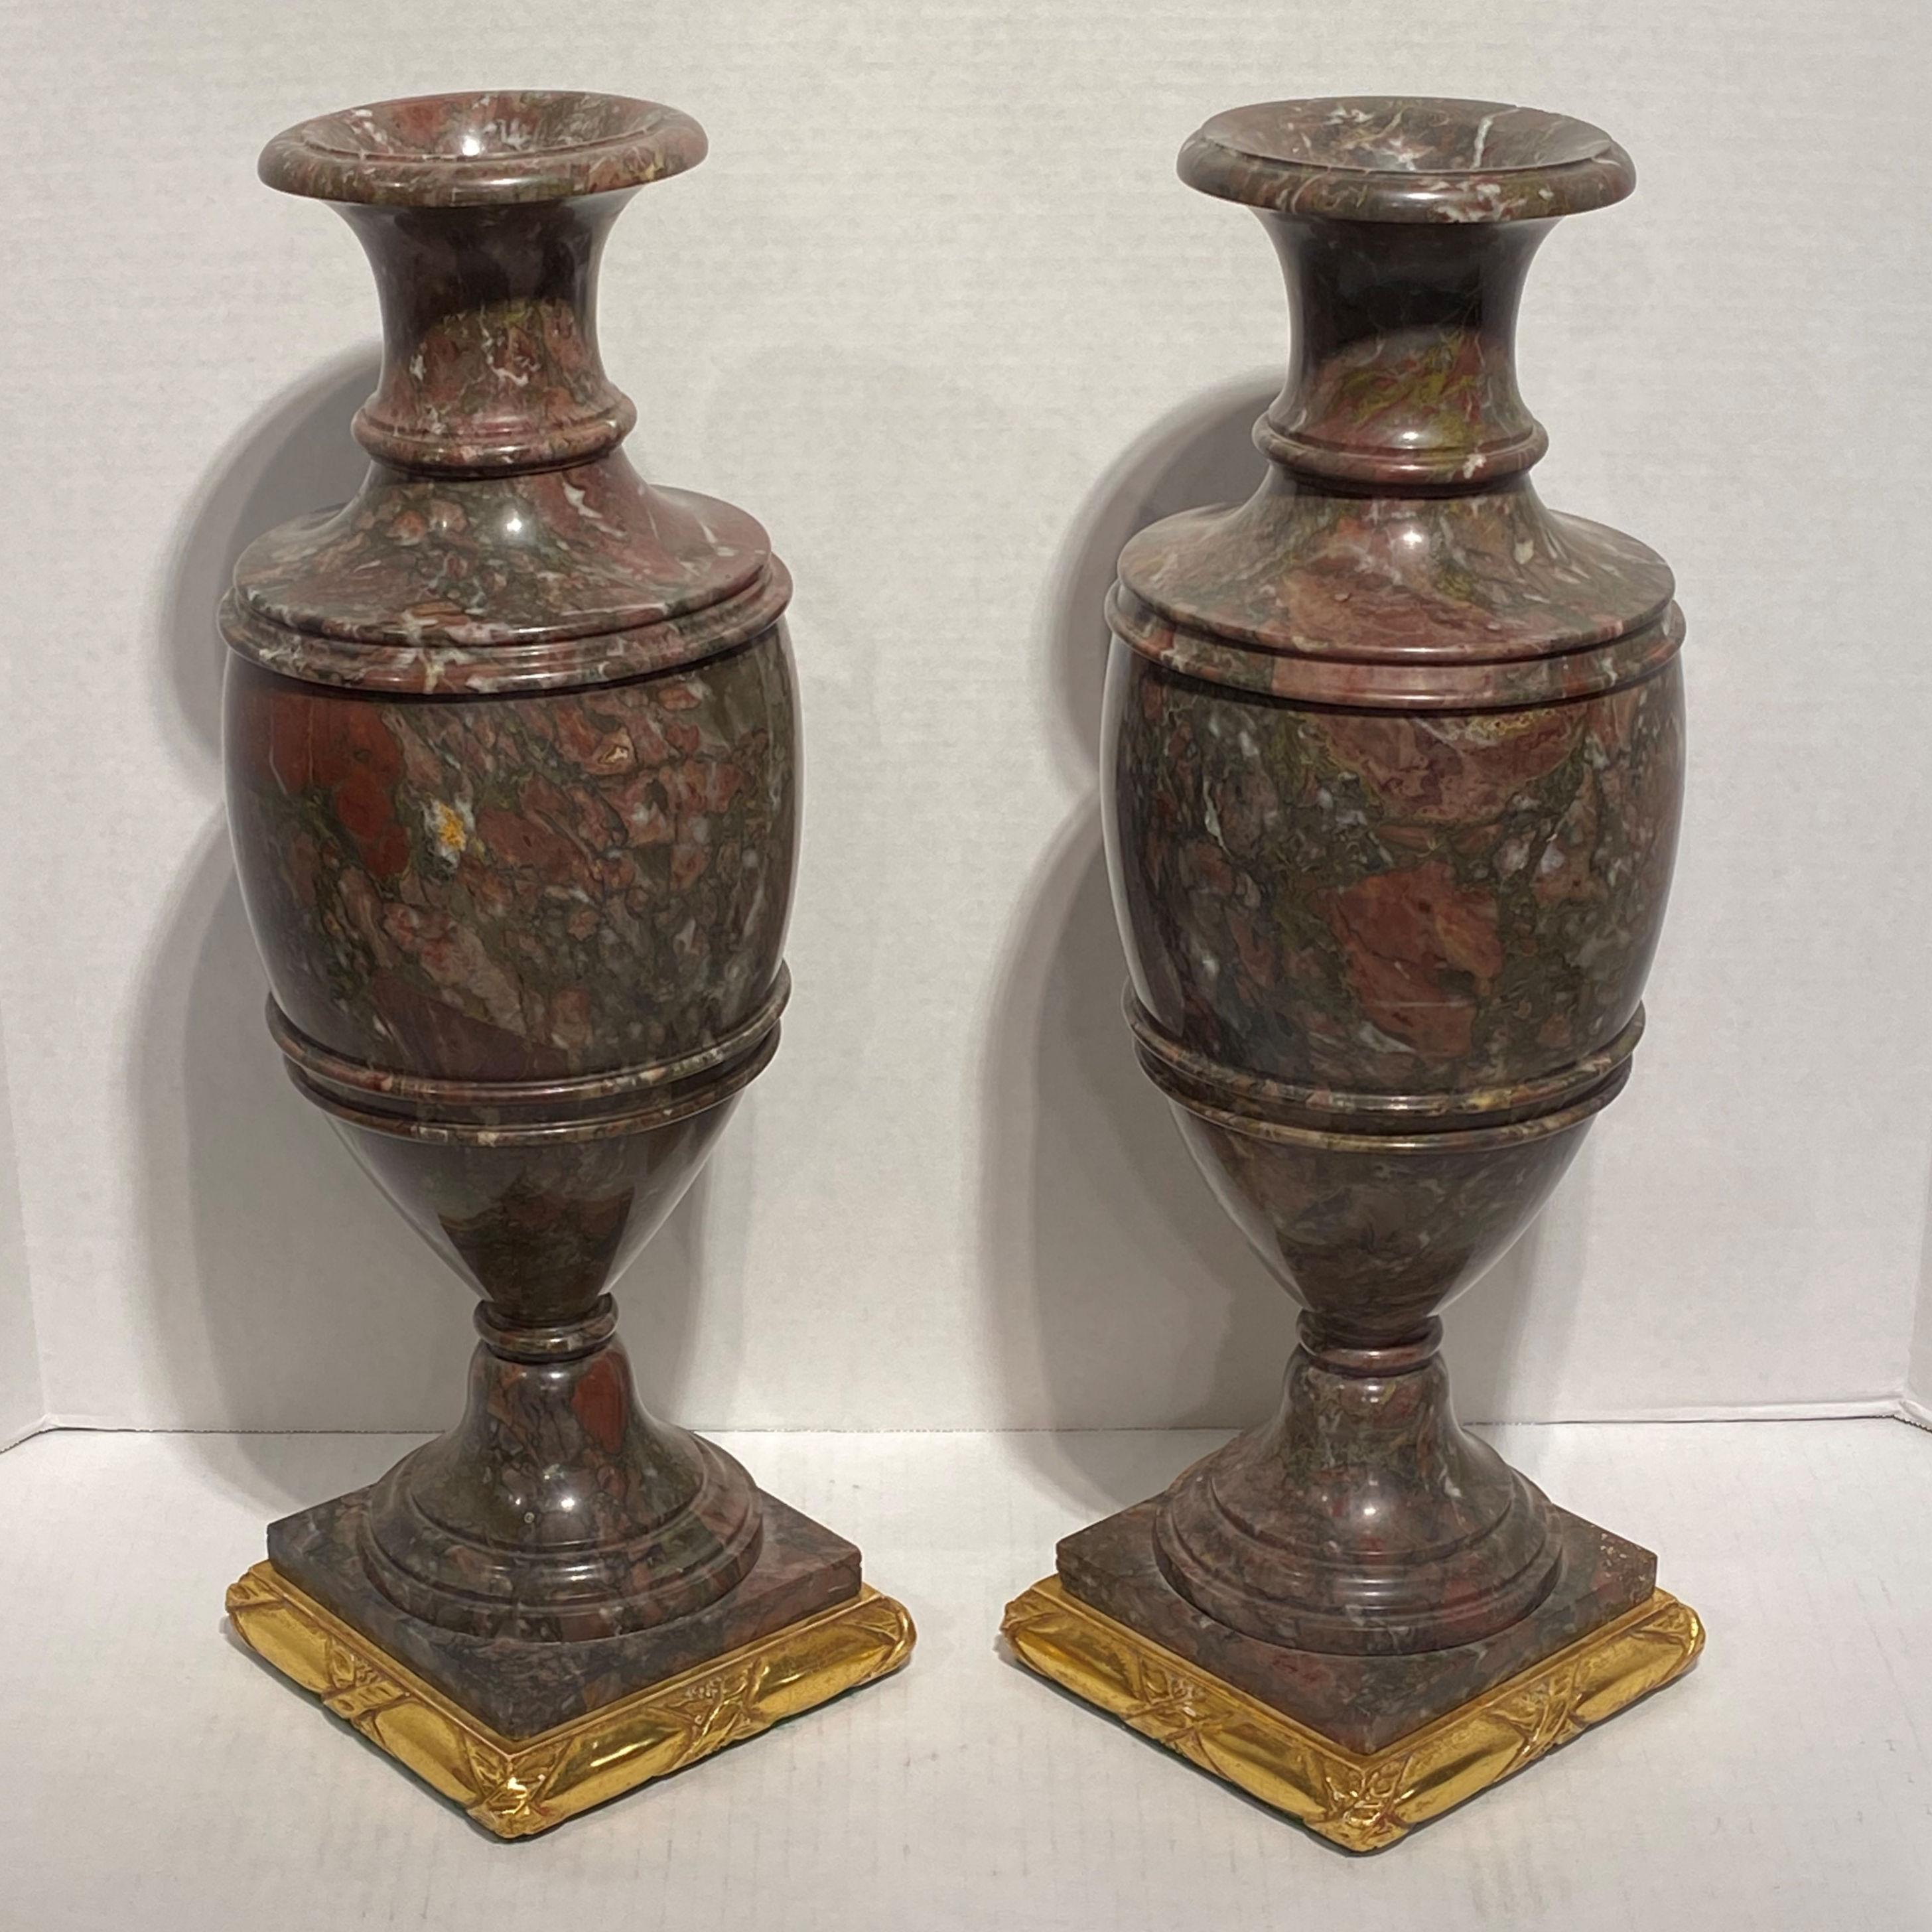 Pair of 19 century Italian neoclassical Rouge marble vases on later giltwood bases.
 